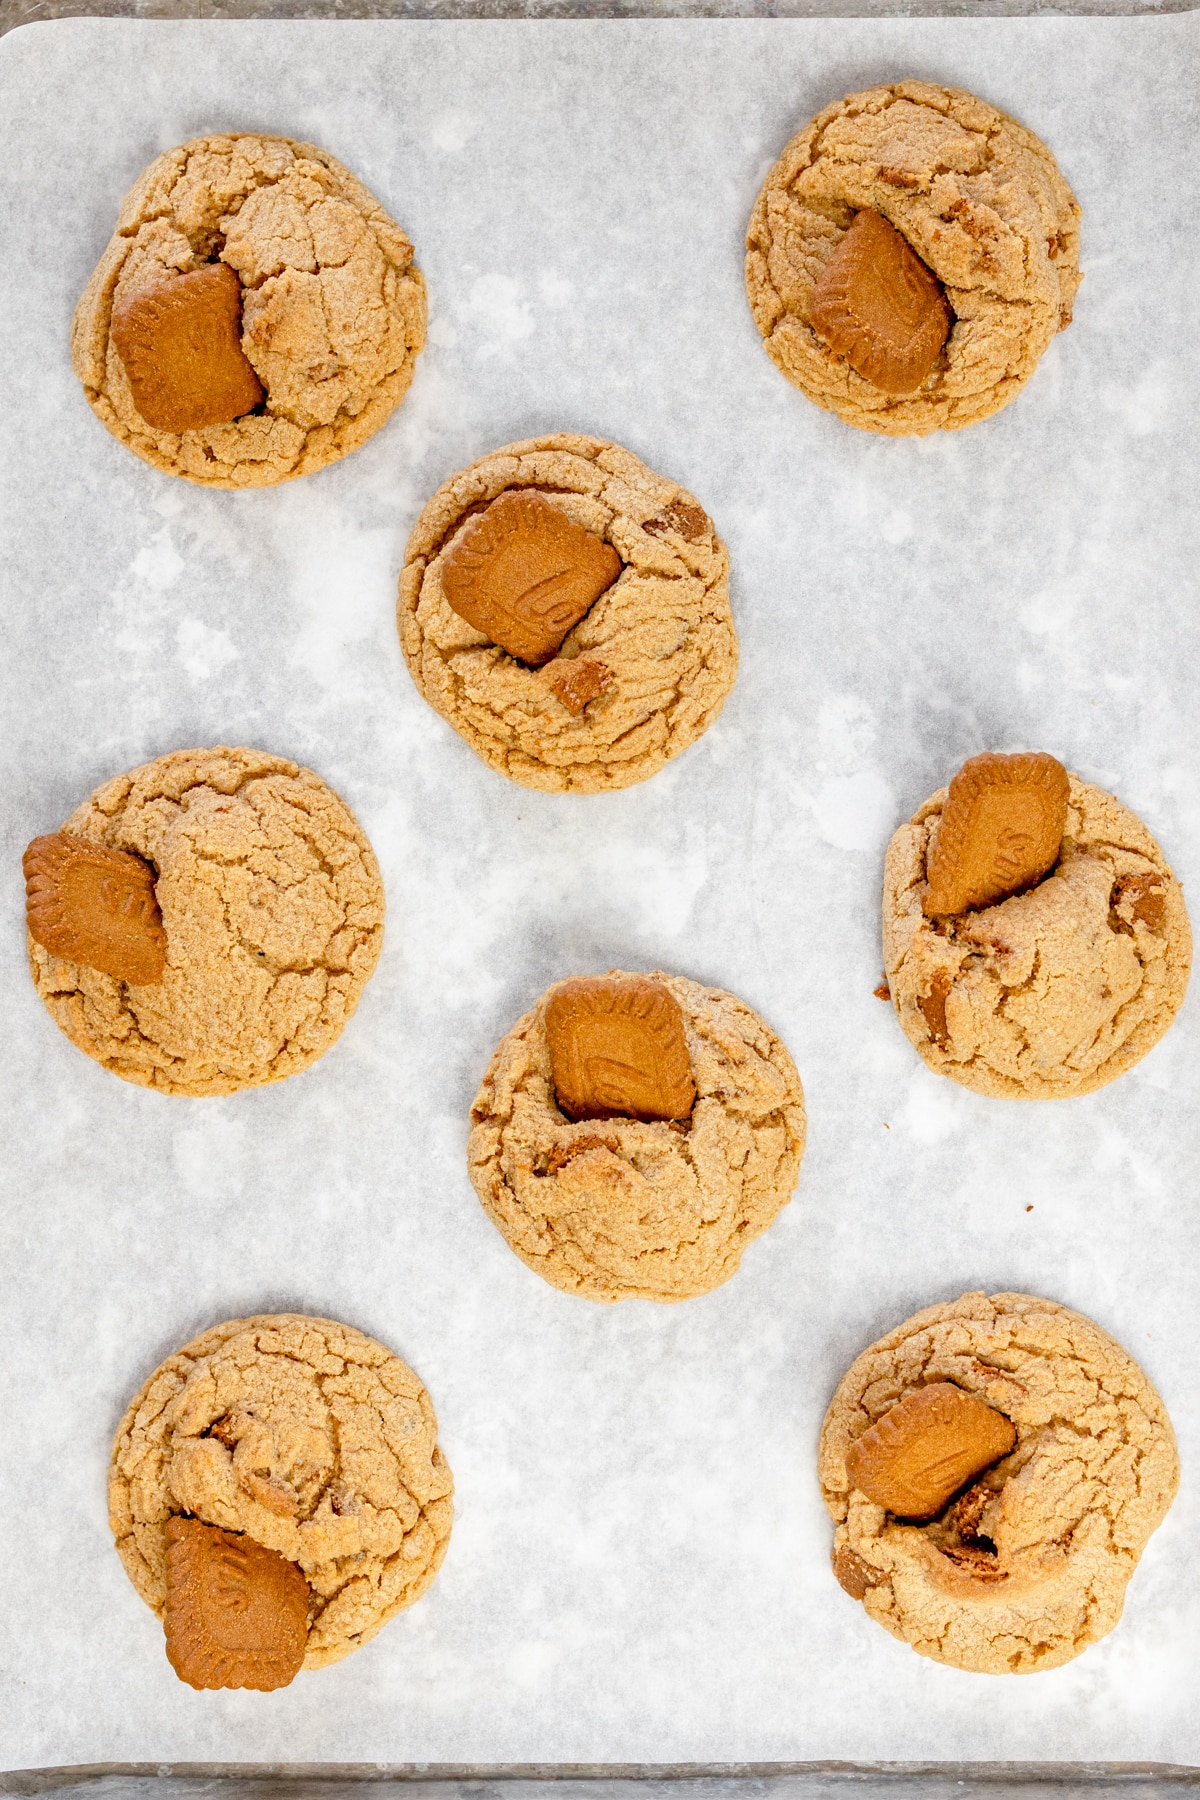 Top view of freshly baked Biscoff cookies with halved Biscoff cookies sticking out of them from the center.